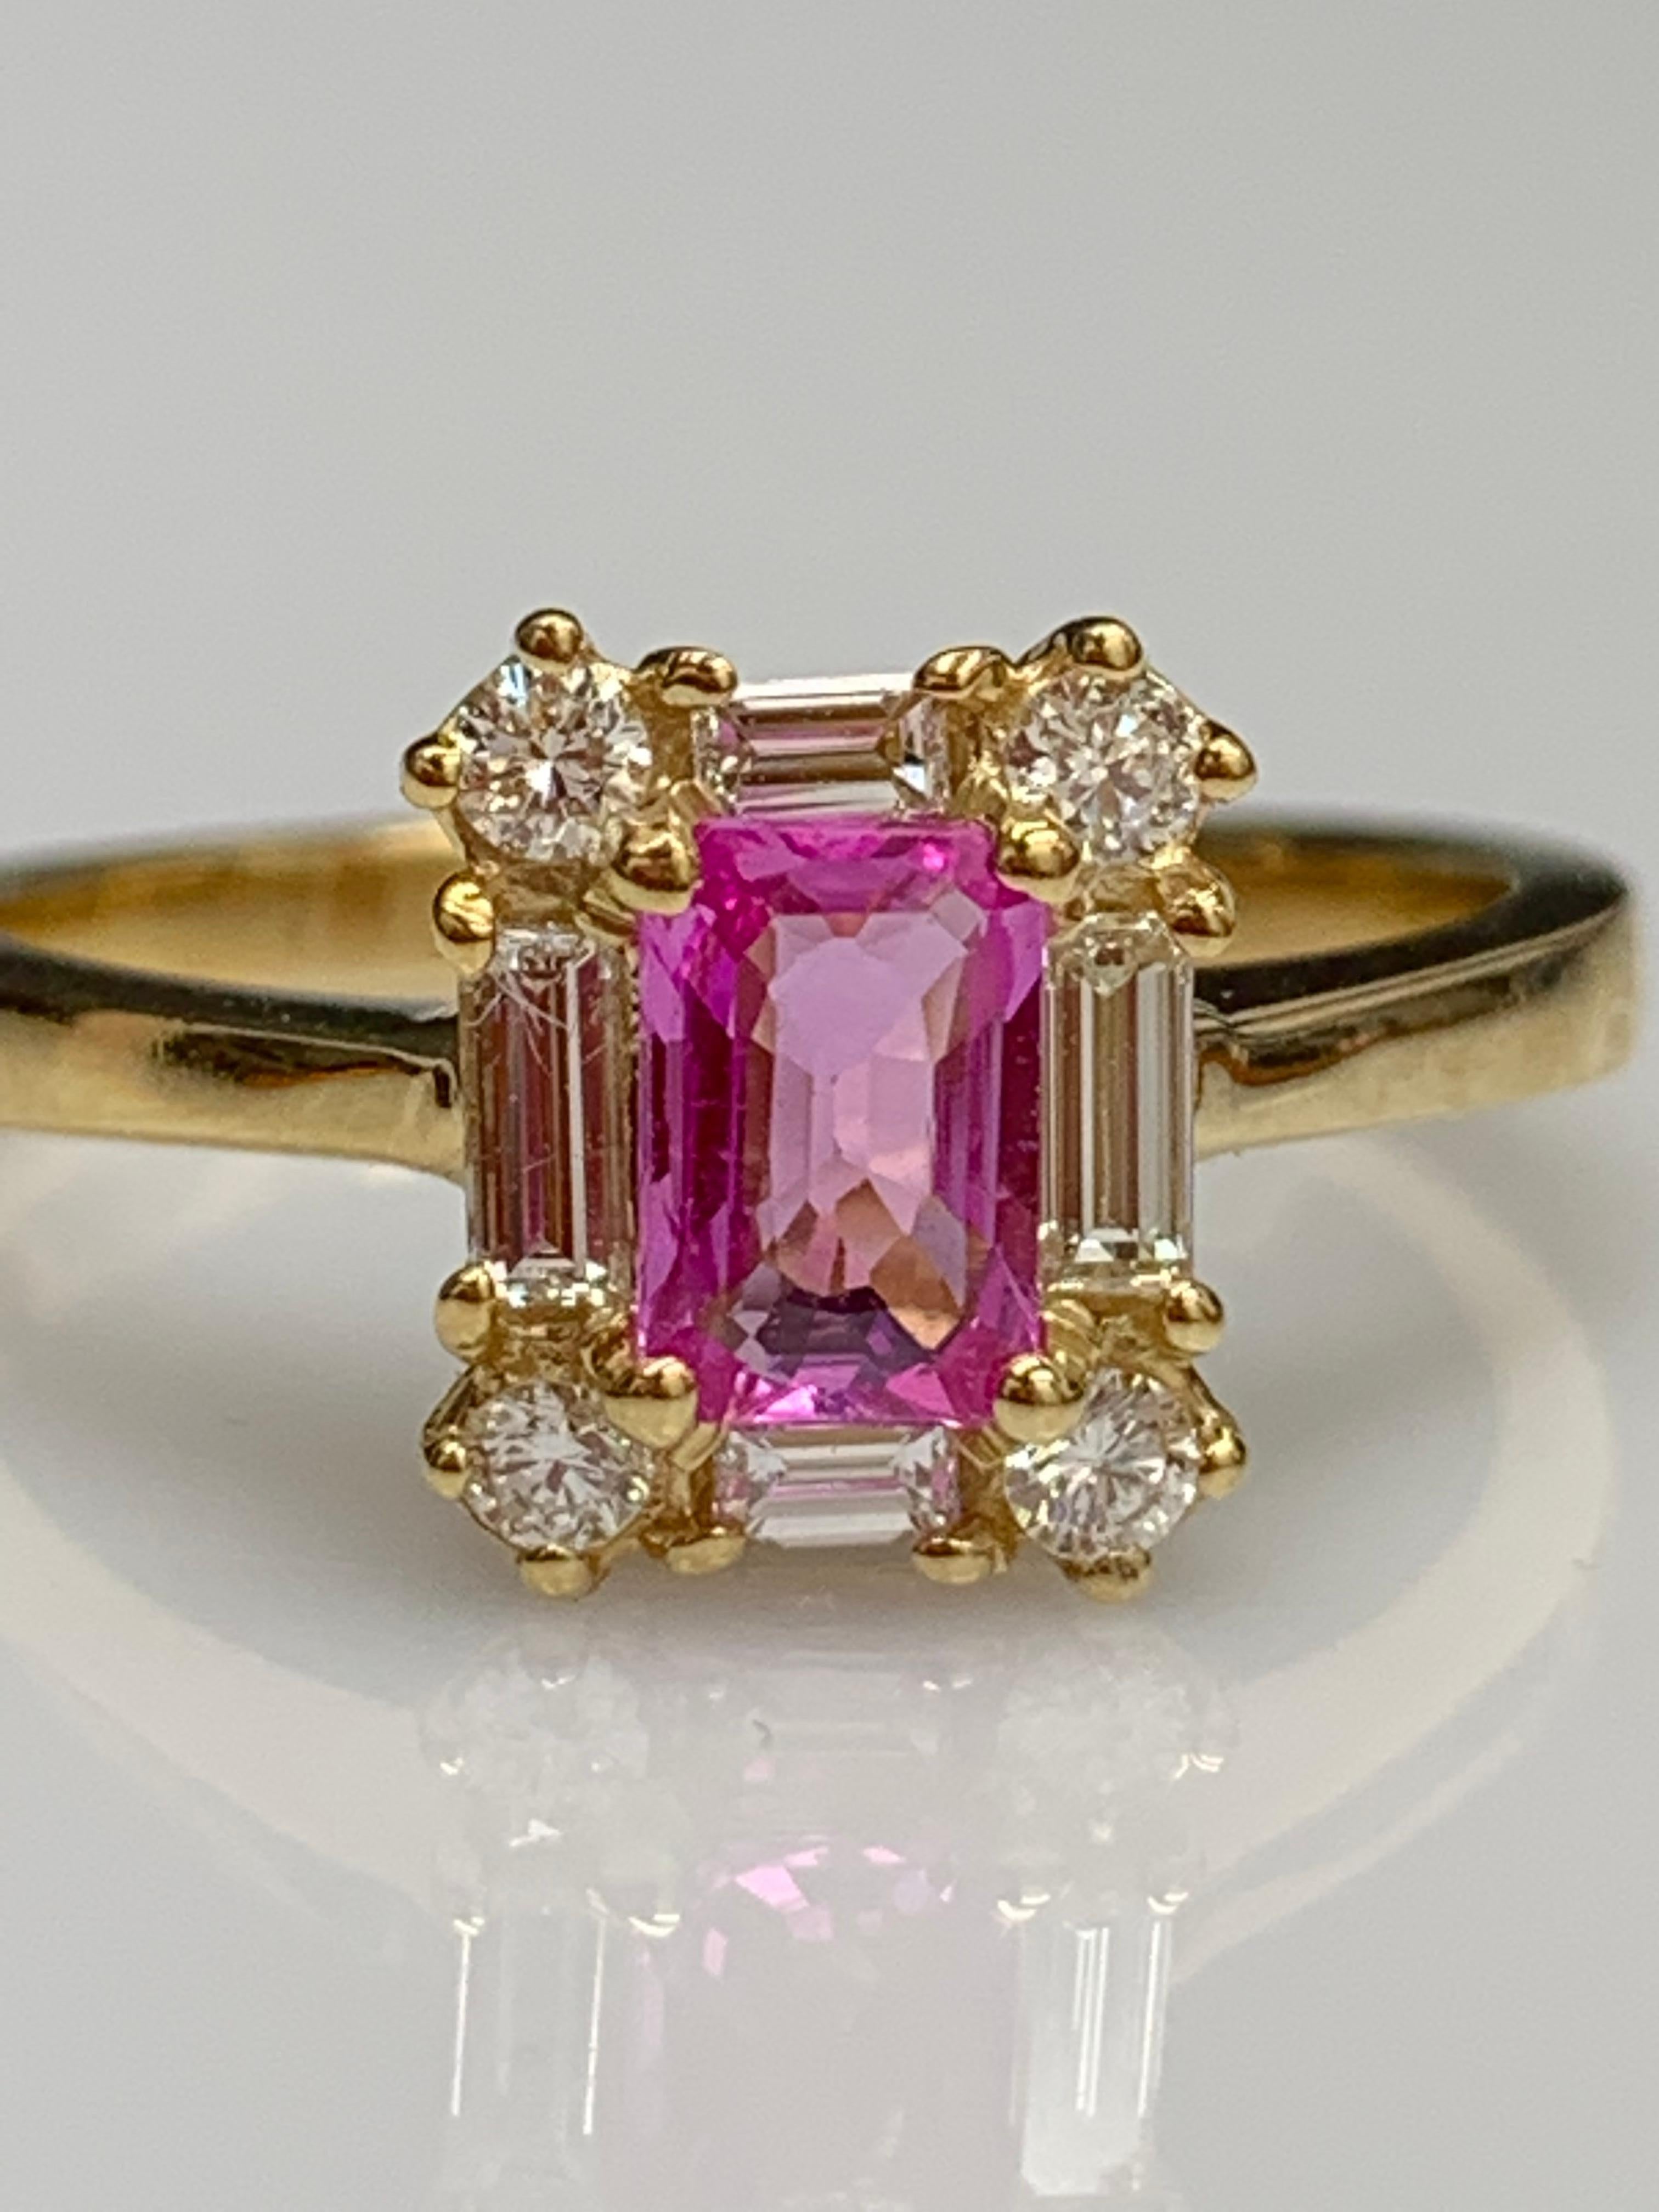 0.55 Carat Emerald Cut Pink Sapphire and Diamond Ring 14K Yellow Gold For Sale 9